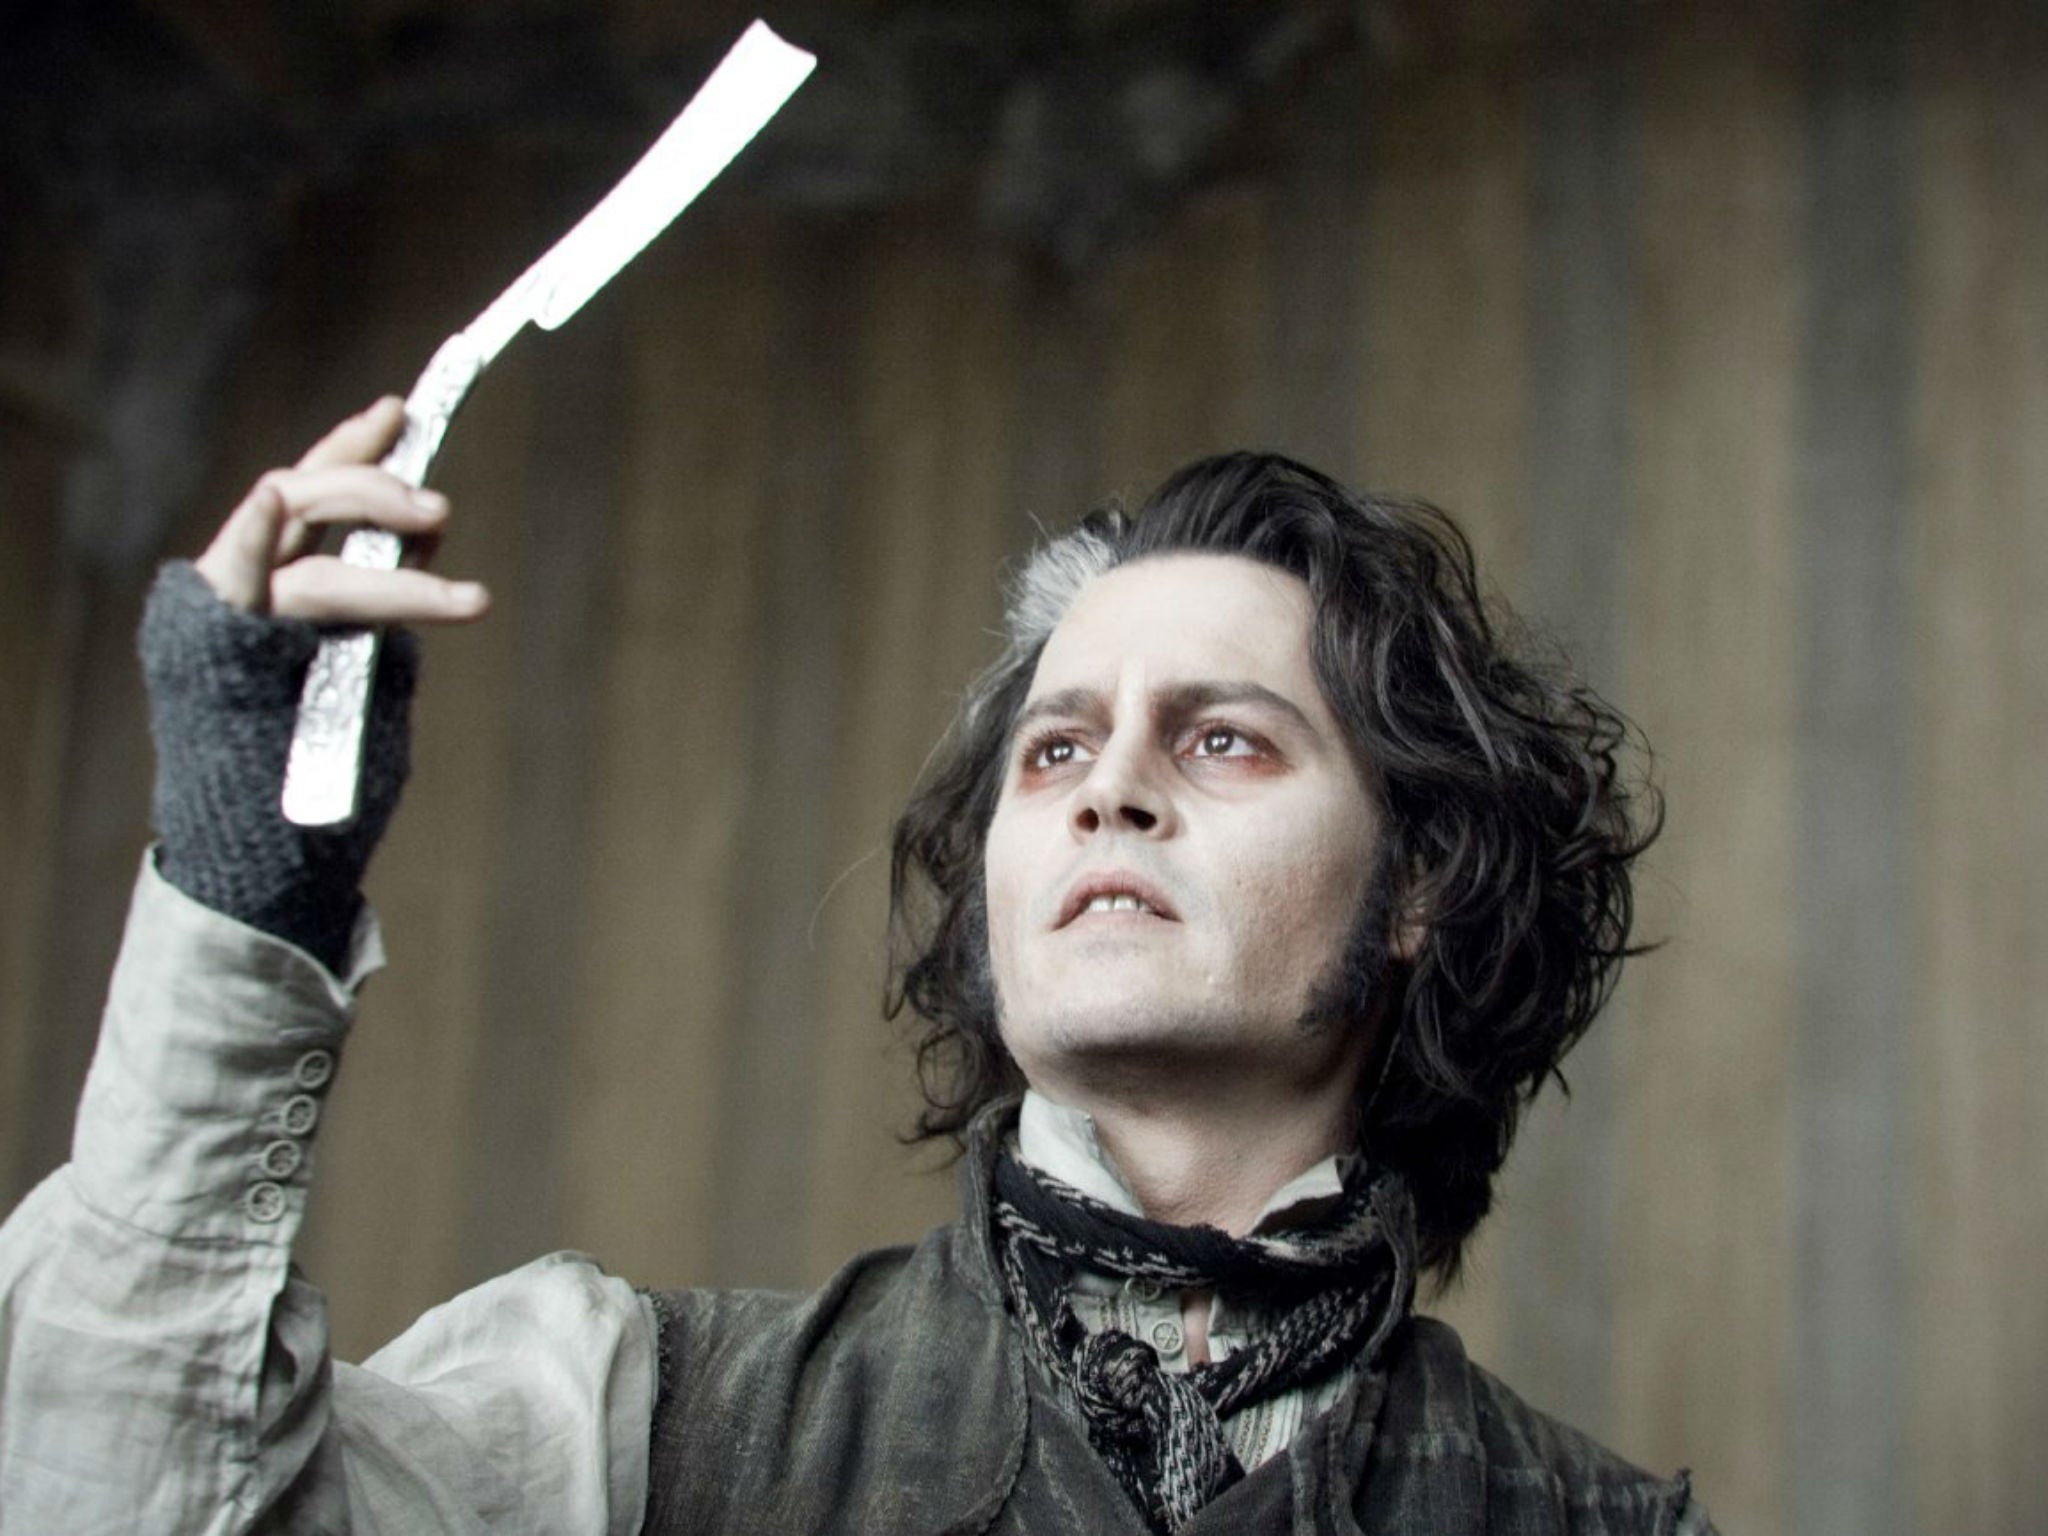 Sweeney Todd school play takes 'realistic' too far leaving two boys